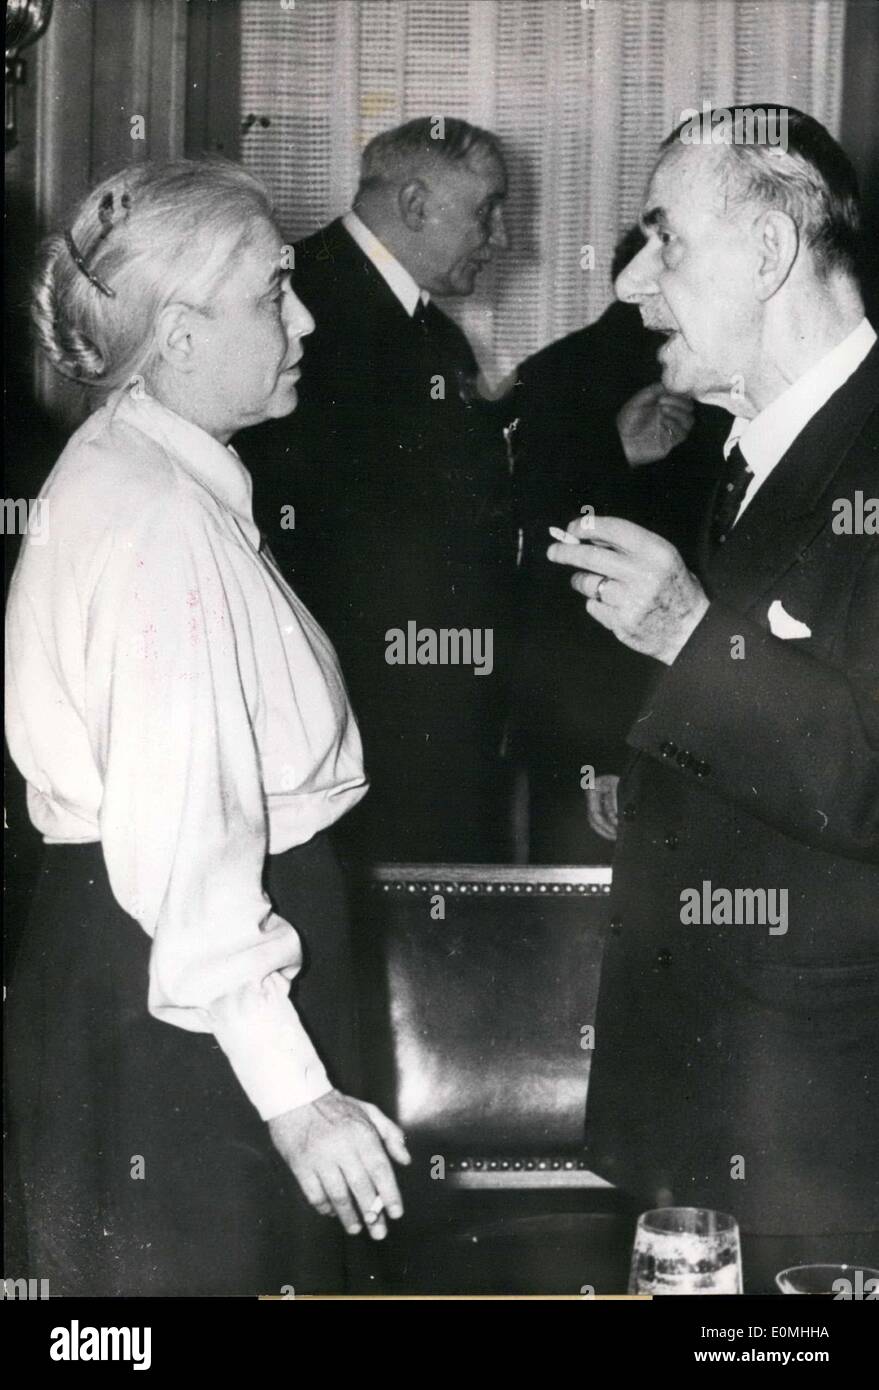 May 16, 1955 - In celebration of Friedrich Schiller, Novelist Thomas Mann spoke at the German National Theater. After the opening ceremony there was a reception at the ''Elephant'' hotel, at which Thomas Mann, the Stalin Prize winner and National Prize winner, talked animatedly with Anna Seghers. Stock Photo